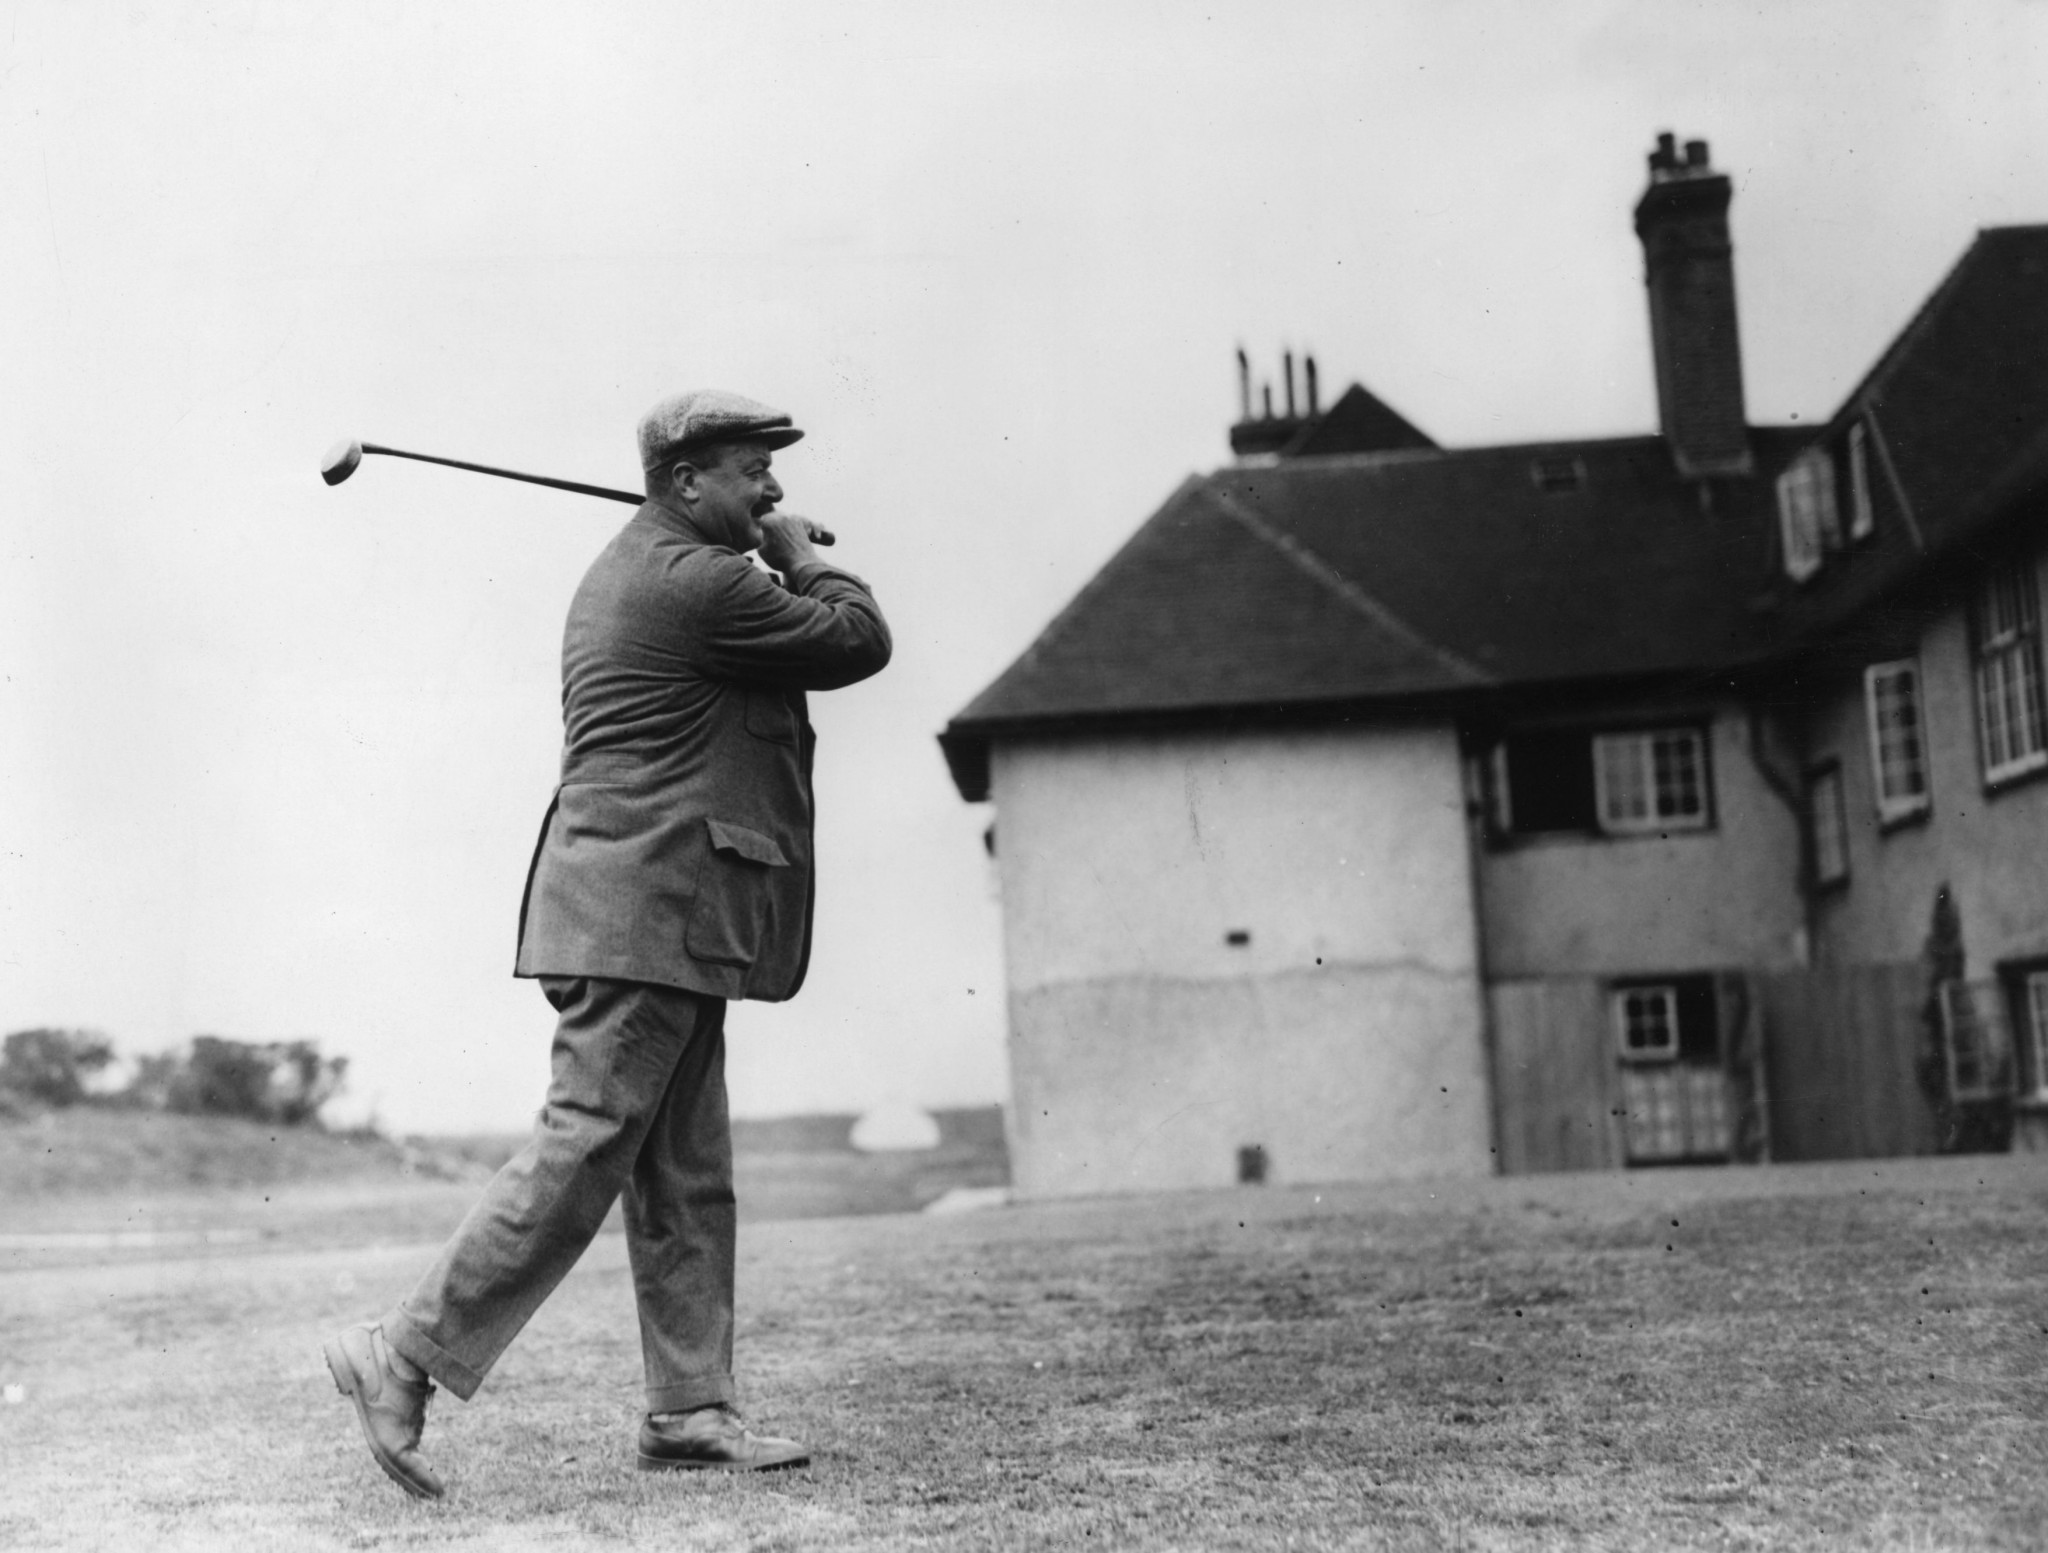 Arnaud Massy, the first French winner of the Open Championship in 1907, led France to team glory in Paris ©Getty Images